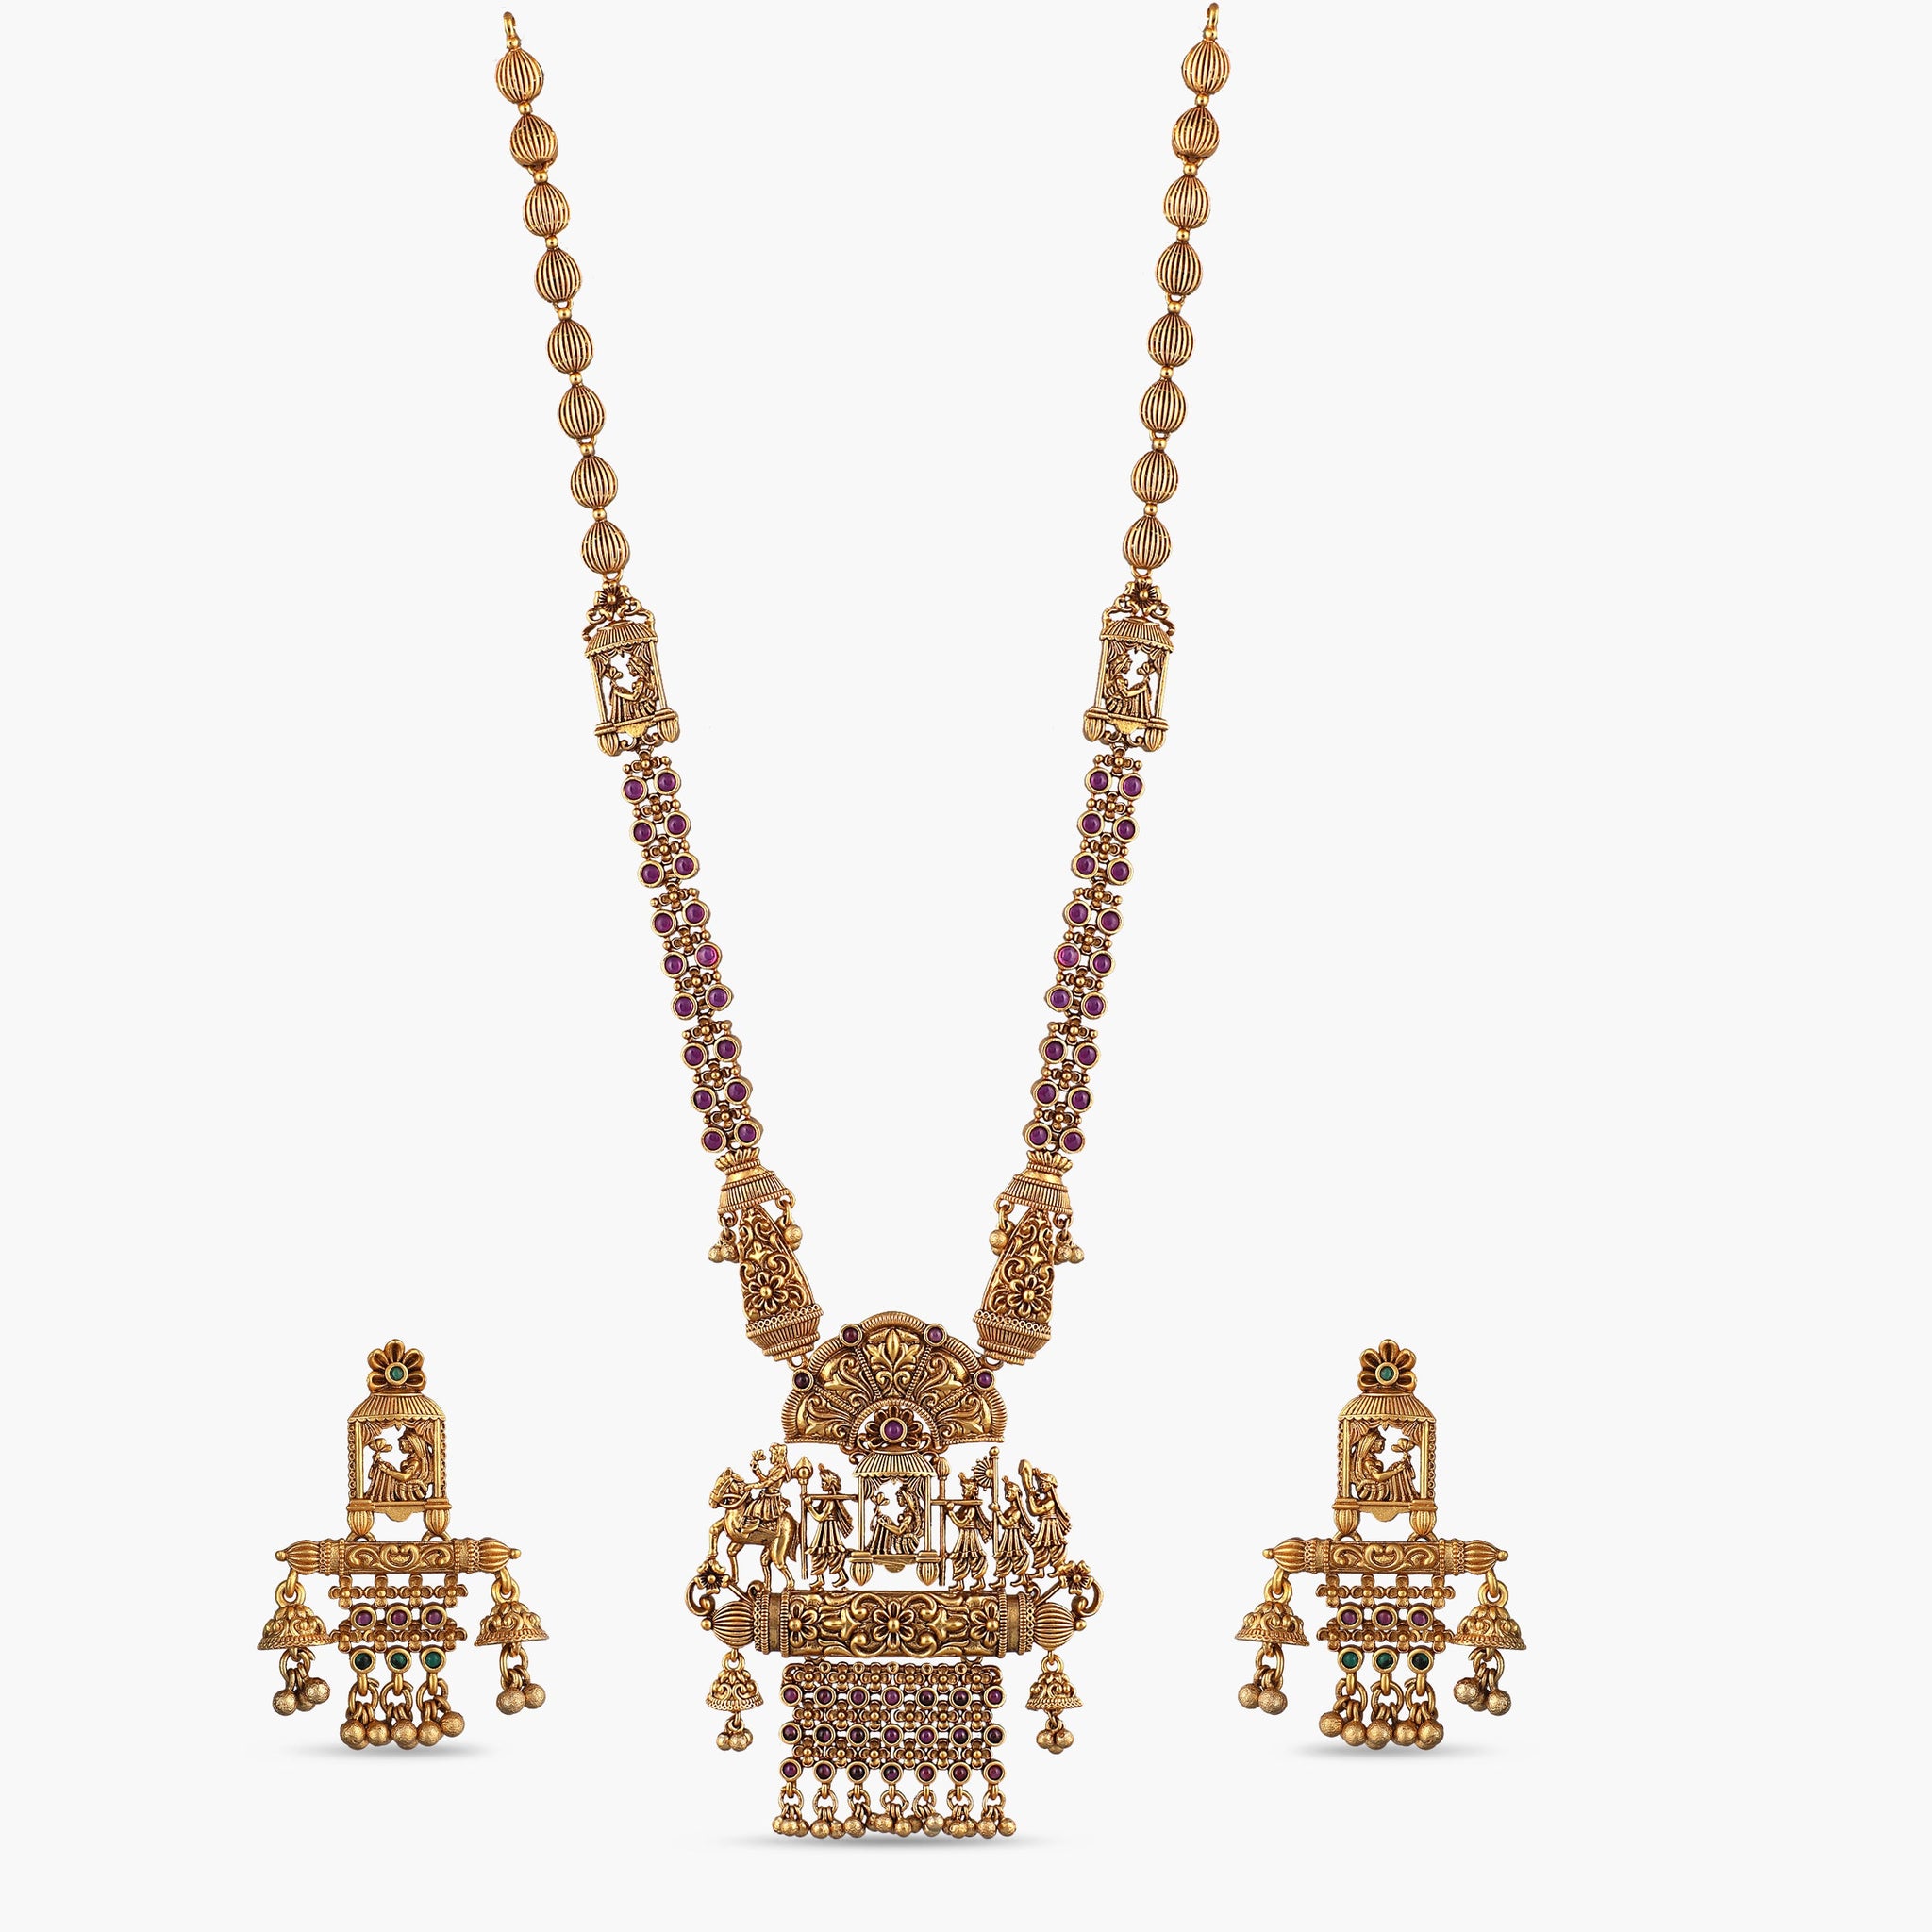 Reliance Jewels brings to life the ruins of Hampi with latest collection |  DeshGujarat